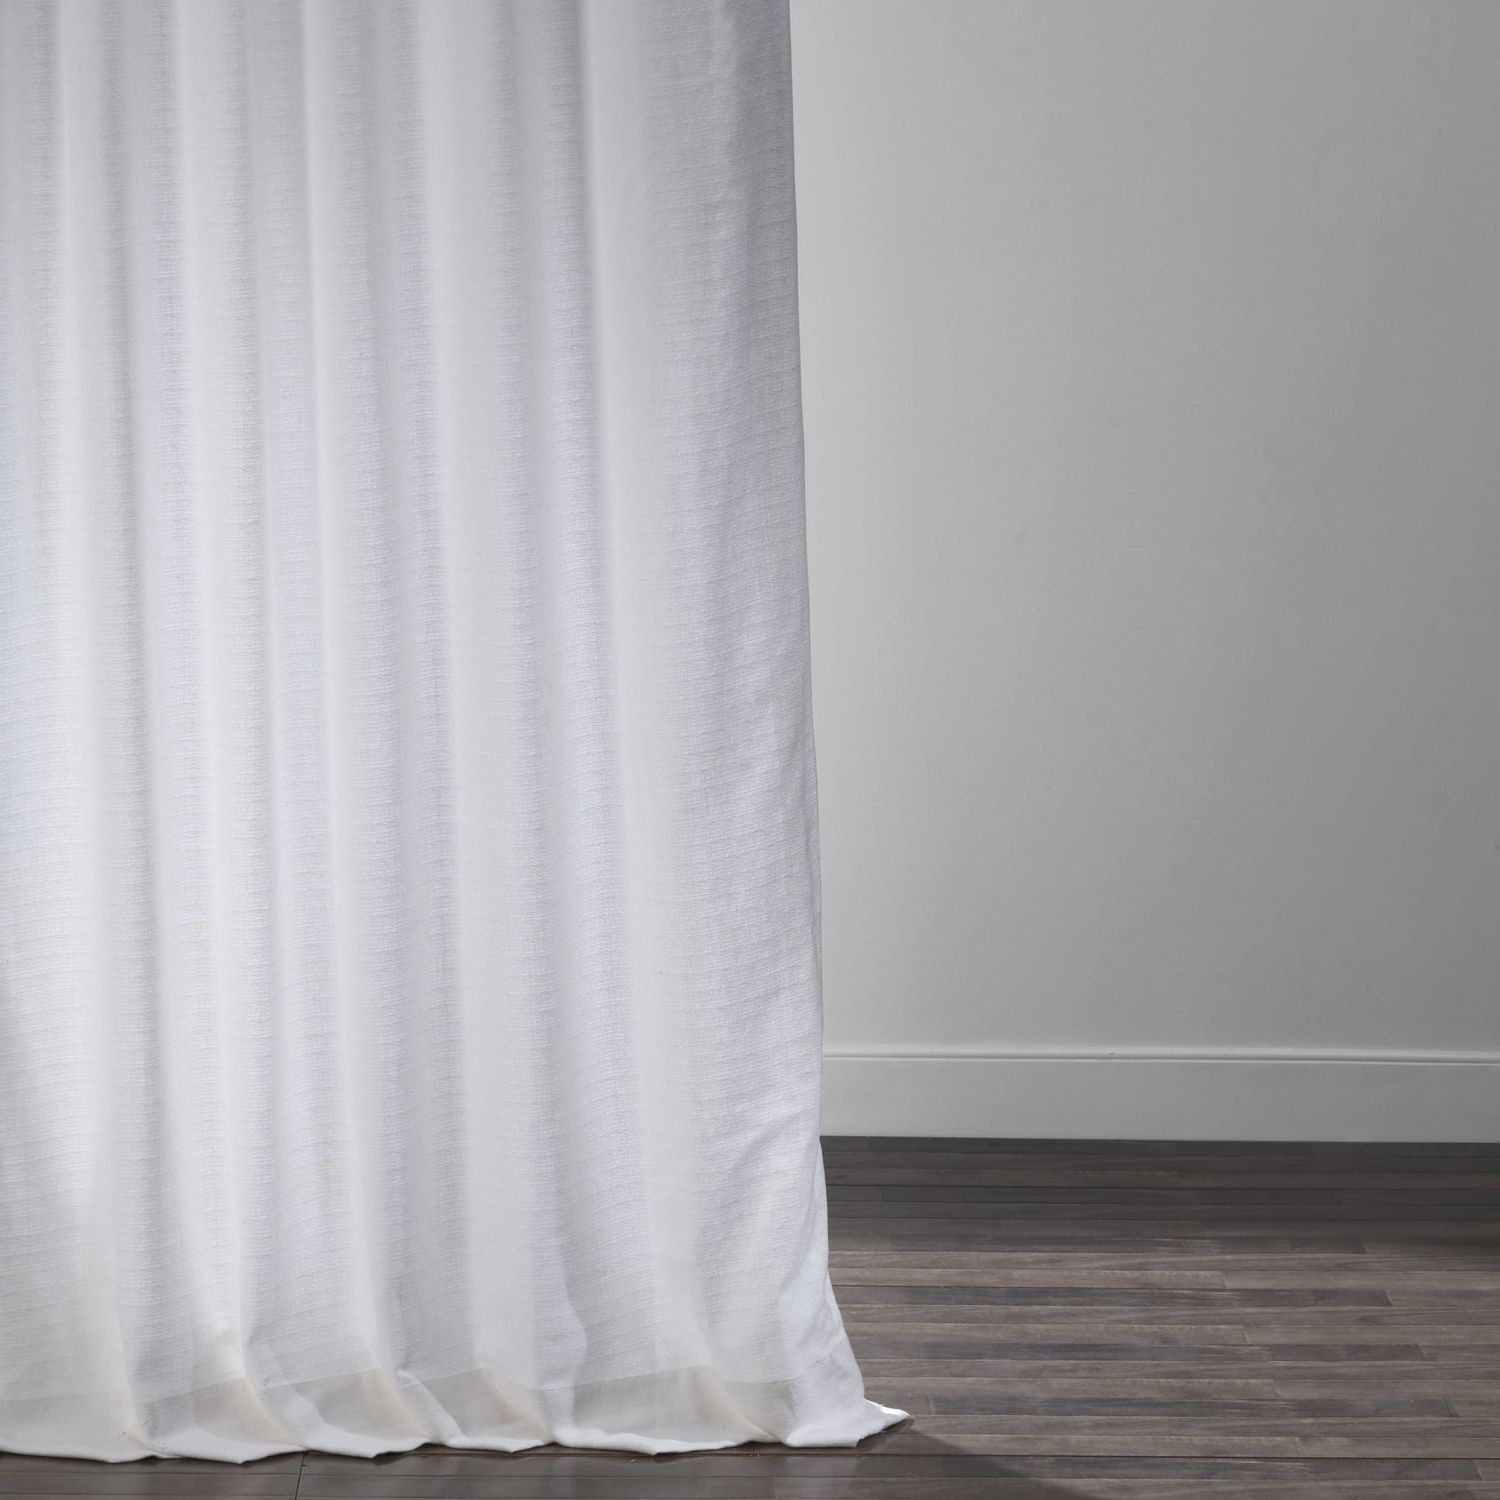 Bark Weave Solid Cotton Curtains Inside Widely Used Details About Bark Weave Cotton Grommet Curtains (sold Per Panel) (View 13 of 20)